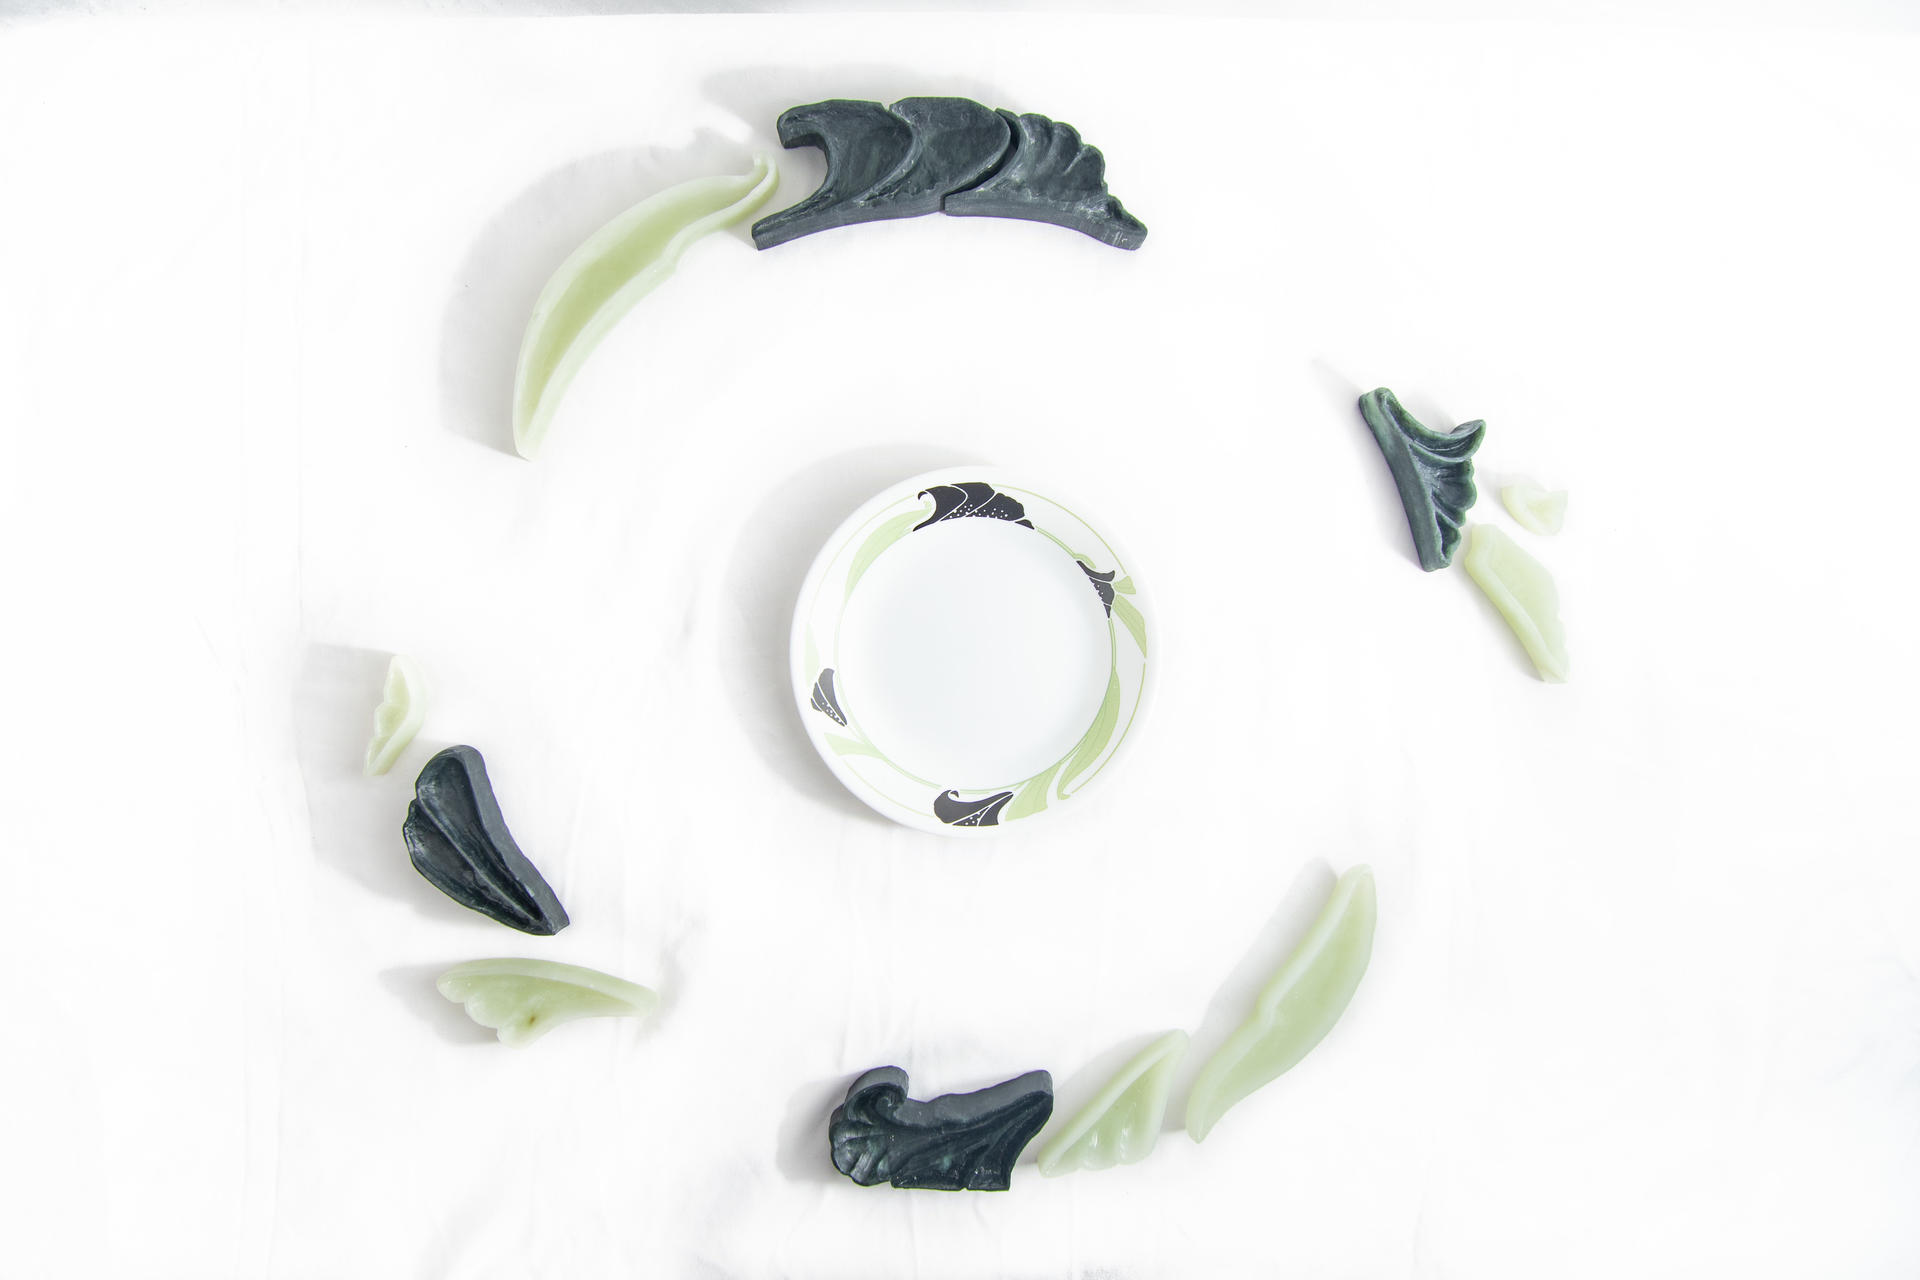 Carved soapstone arranged in a circular pattern around a small plate with the same black and green pattern